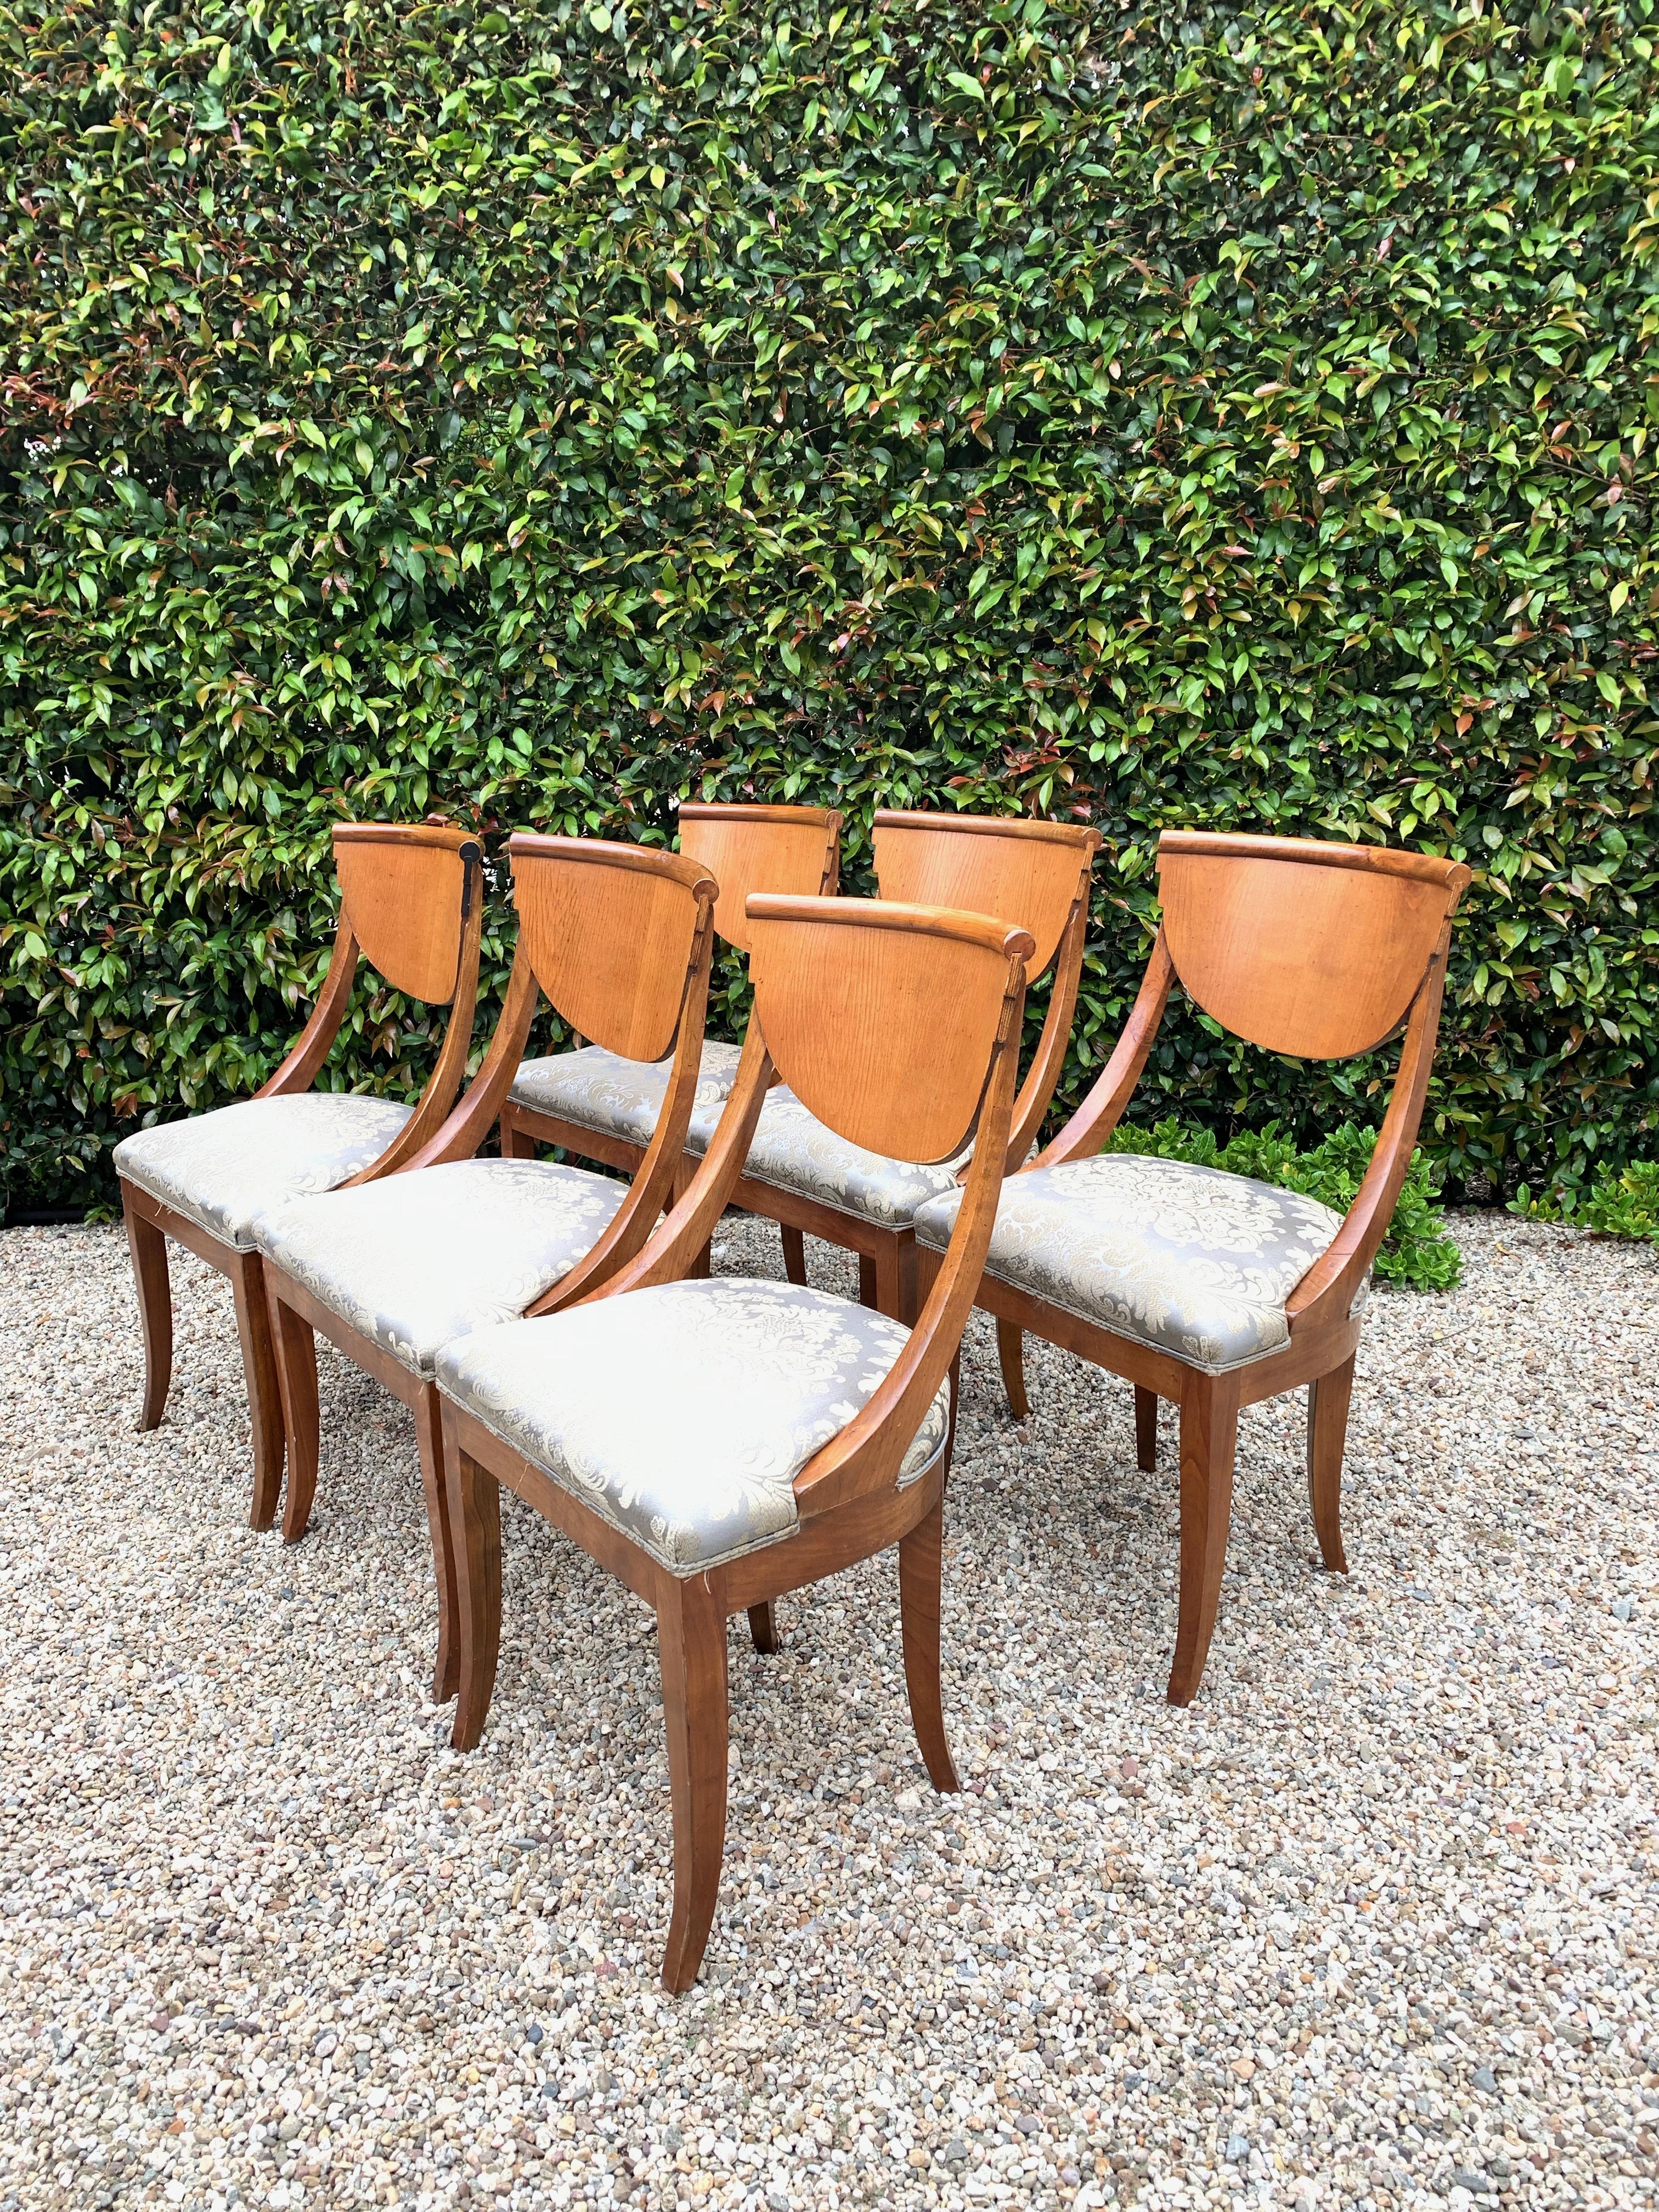 Set of six armless curved back (spoonback) dining chairs in the manner of Art Decor or Biedermeier Style. This handsome set are truly stunning and very comfortable! In the manner of early 19th century style, the Classic design is a compliment to any